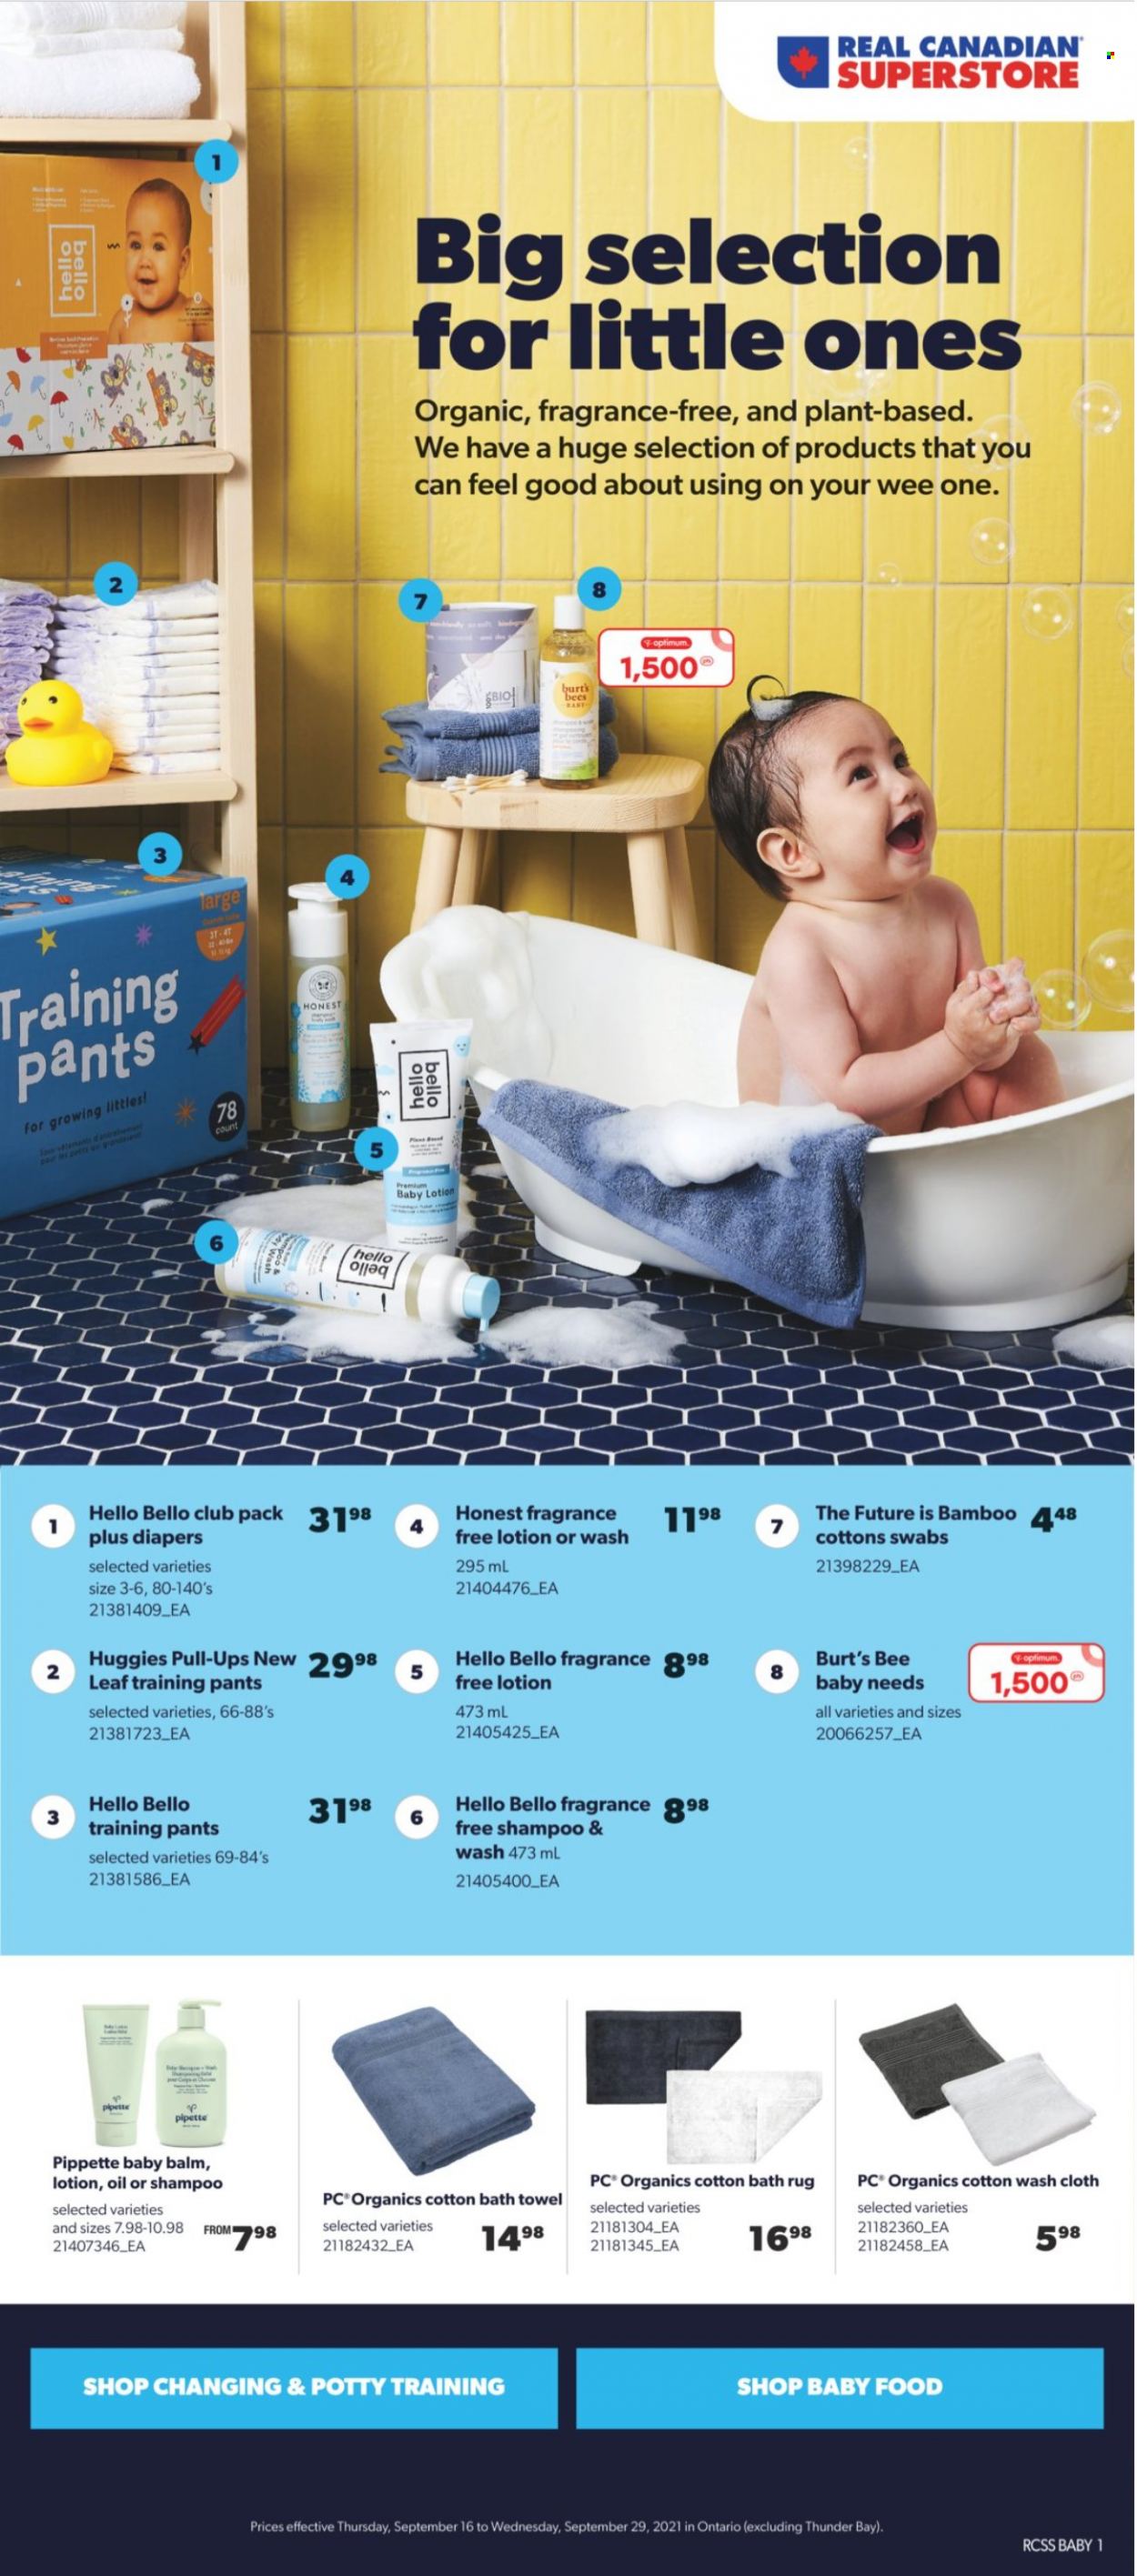 thumbnail - Circulaire Real Canadian Superstore - 16 Septembre 2021 - 29 Septembre 2021 - Produits soldés - shampooing, Huggies. Page 1.